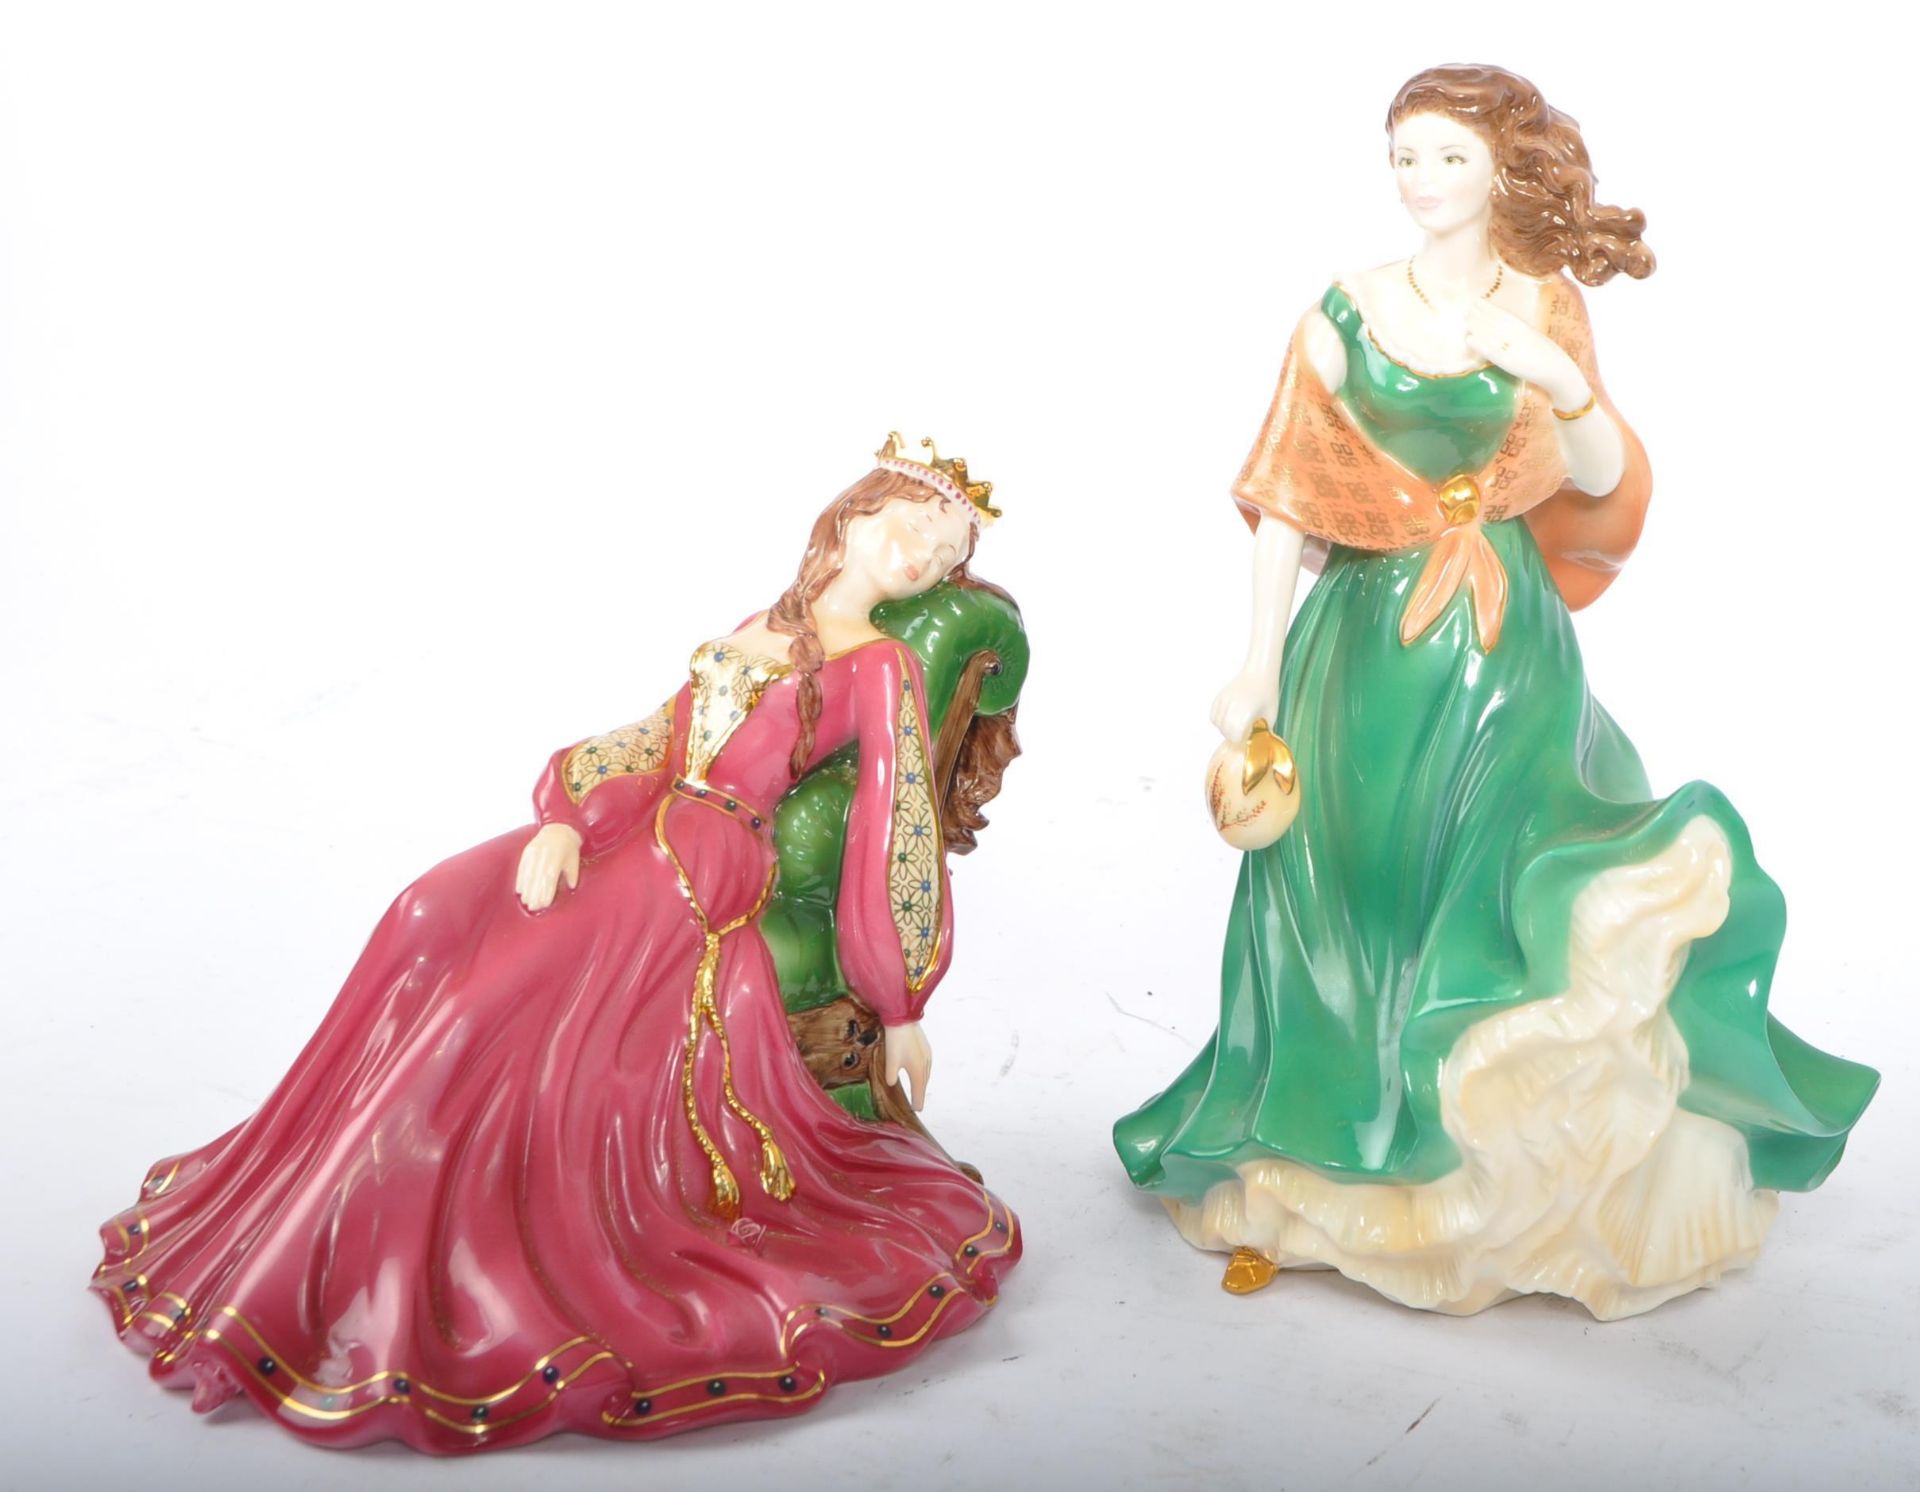 TWO LIMITED EDITION COALPORT FIGURINES - CATHY & SLEEPING BEAUTY